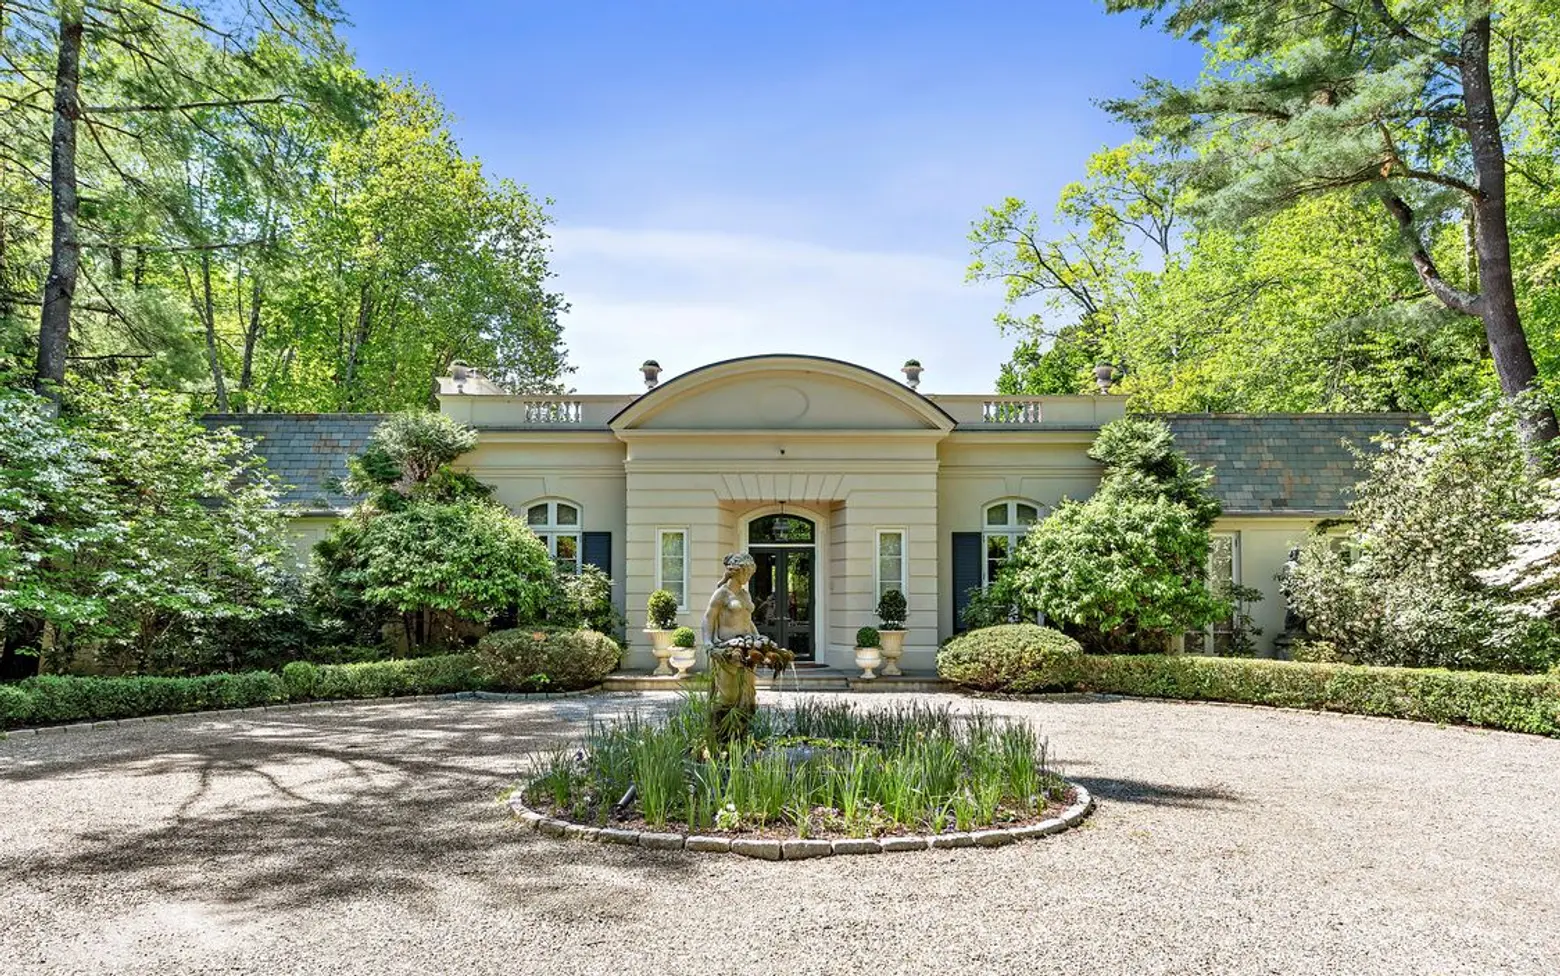 This $1.4M Westchester estate was inspired by Versailles